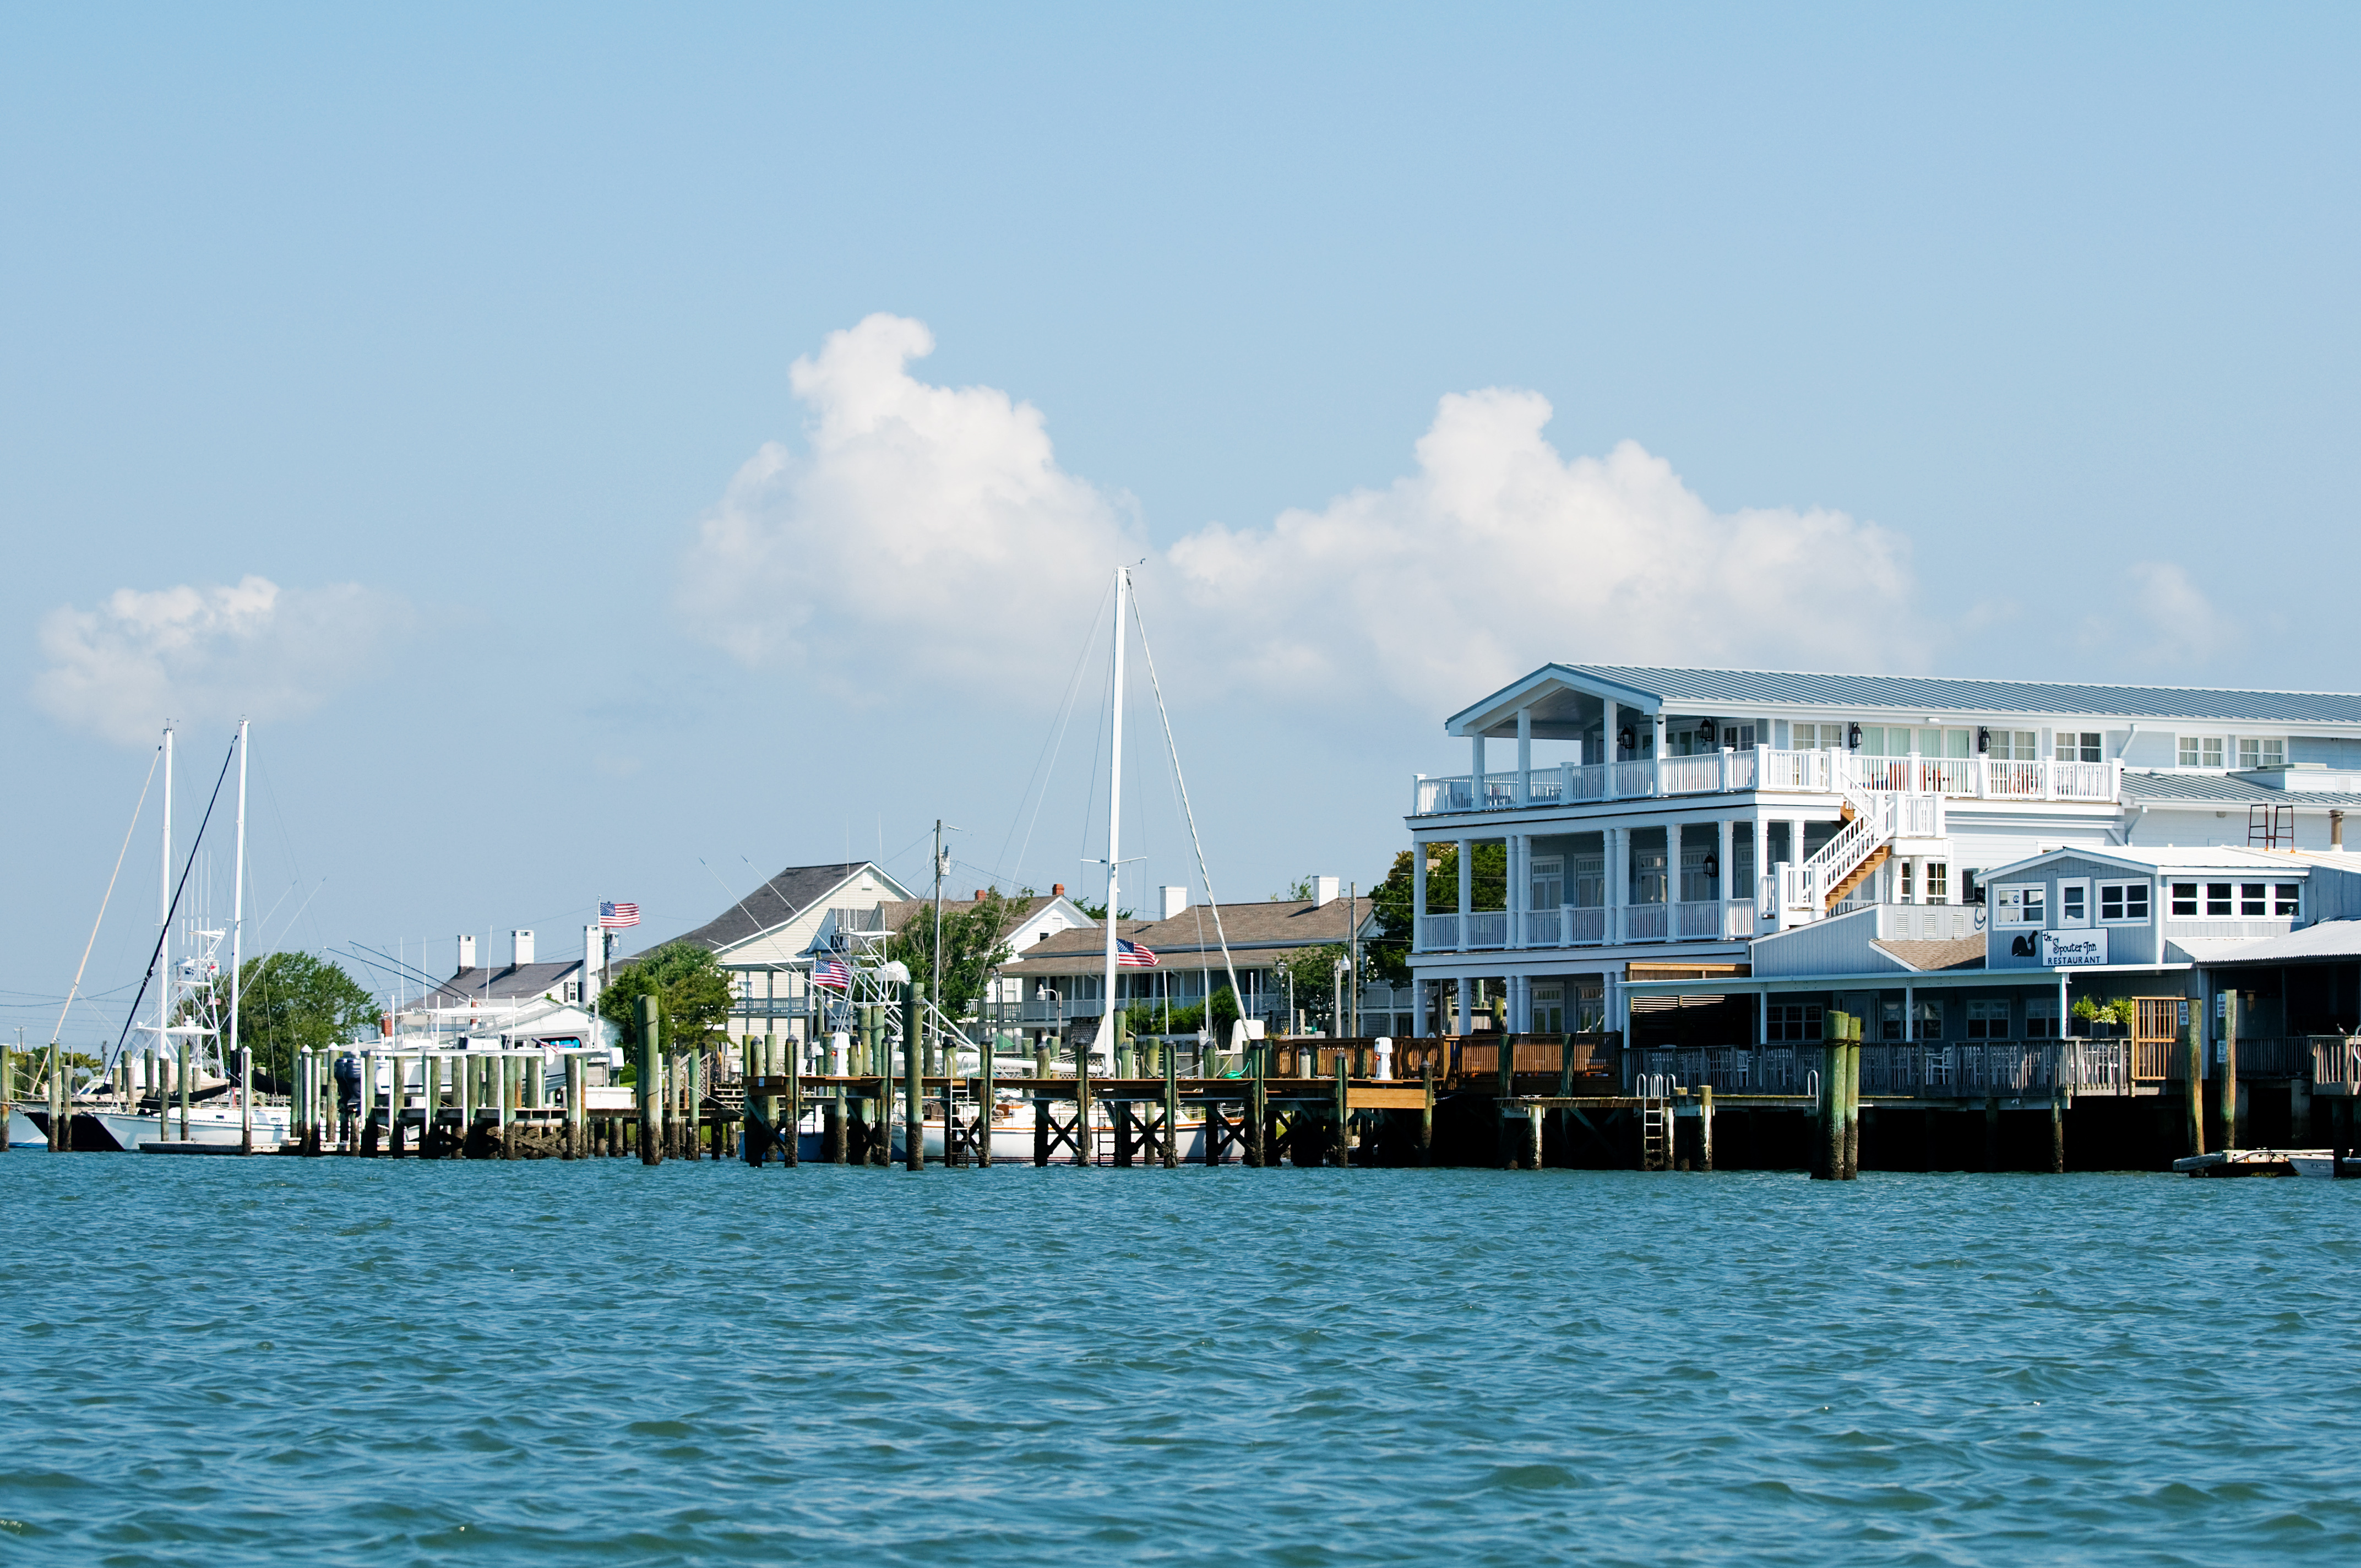 Beaufort Nc Waterfront Homes And Commercial Real Estate For Sale